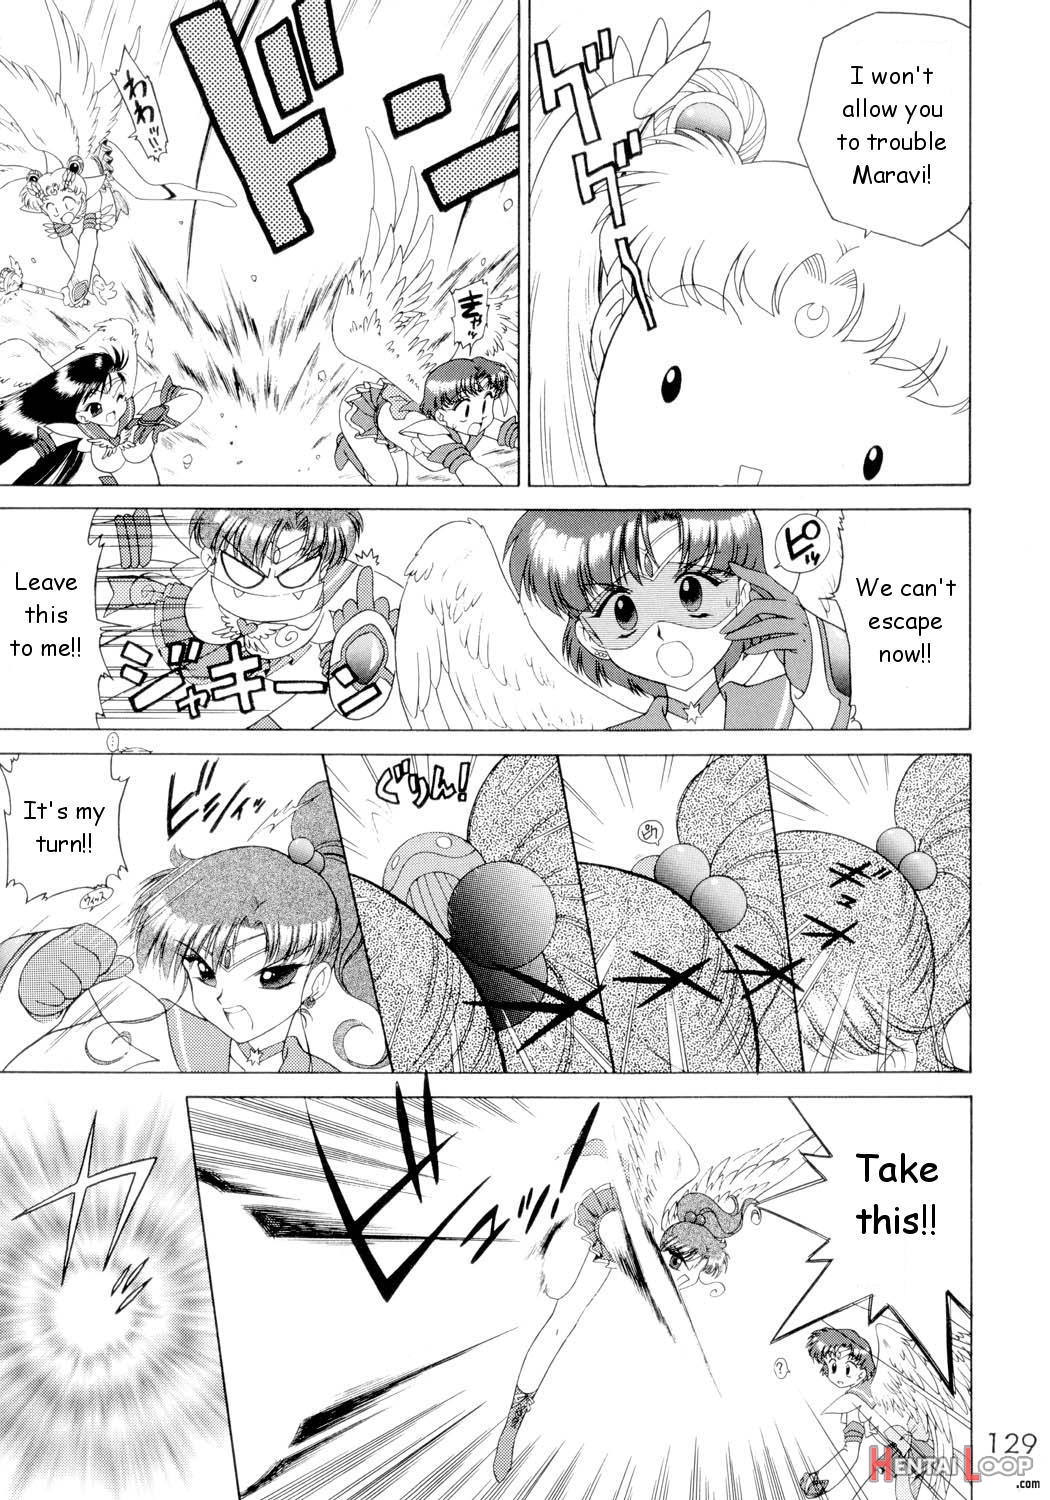 Submission Sailorstars page 128